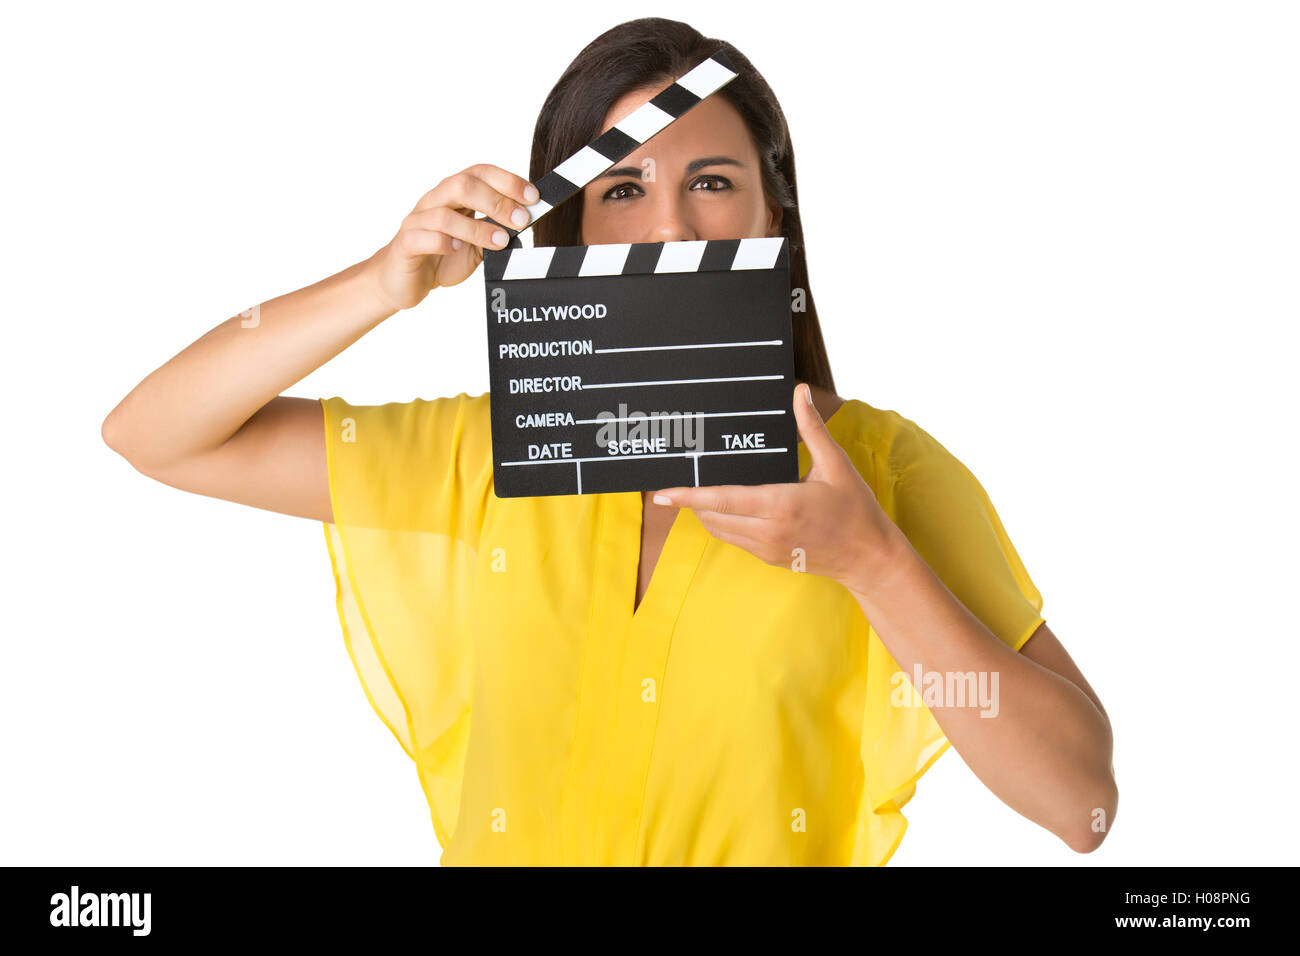 Woman holding a clapperboard, isolated in white Stock Photo